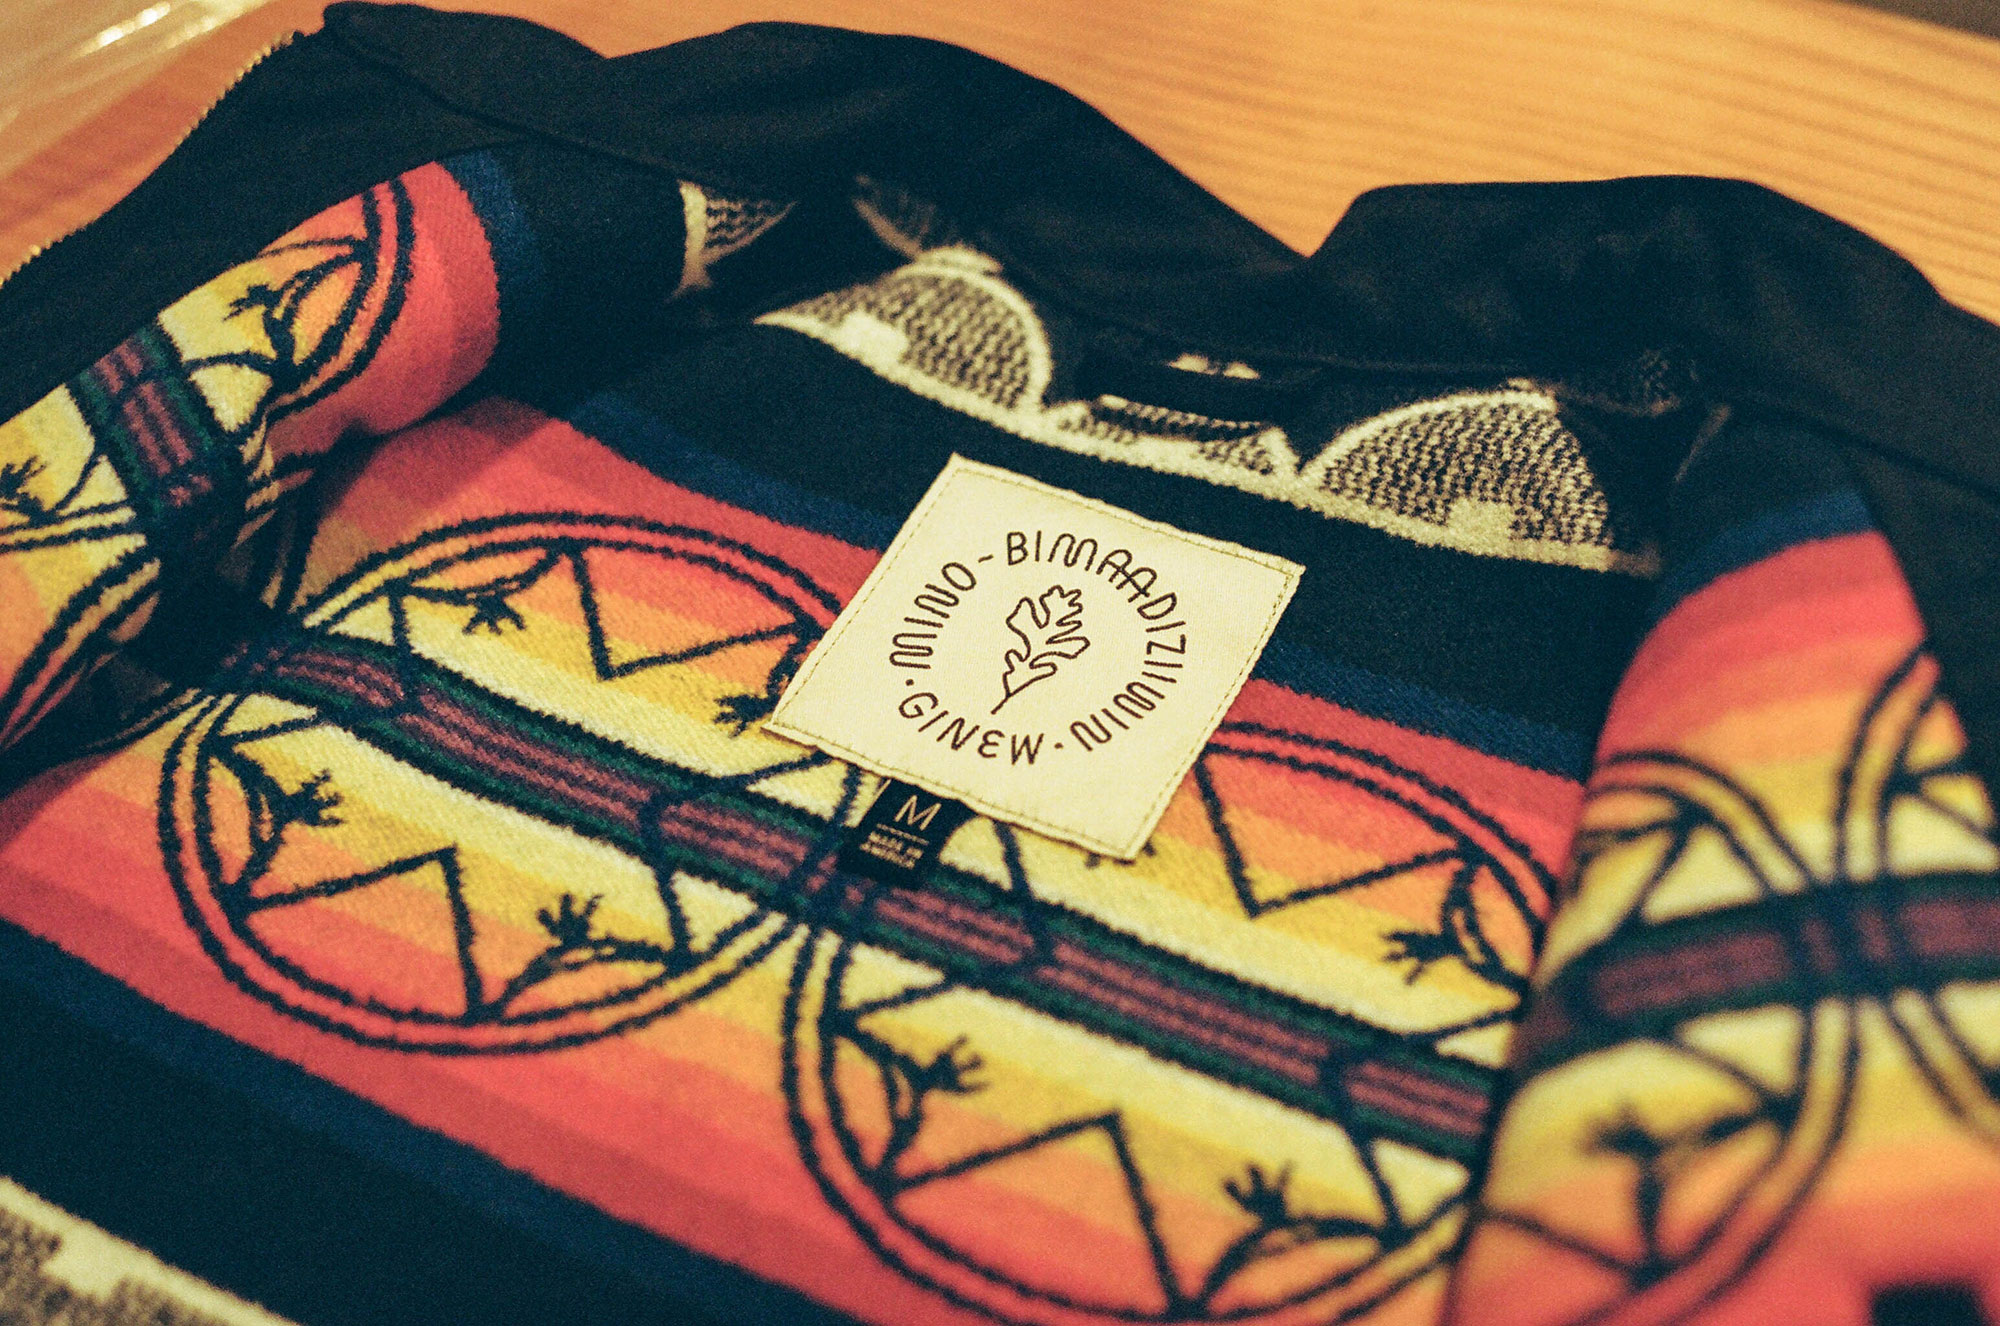 The inside of the top of a black Ginew jacket. Inside is lined with designs, patterns, and symbols that reflect the Native American community.